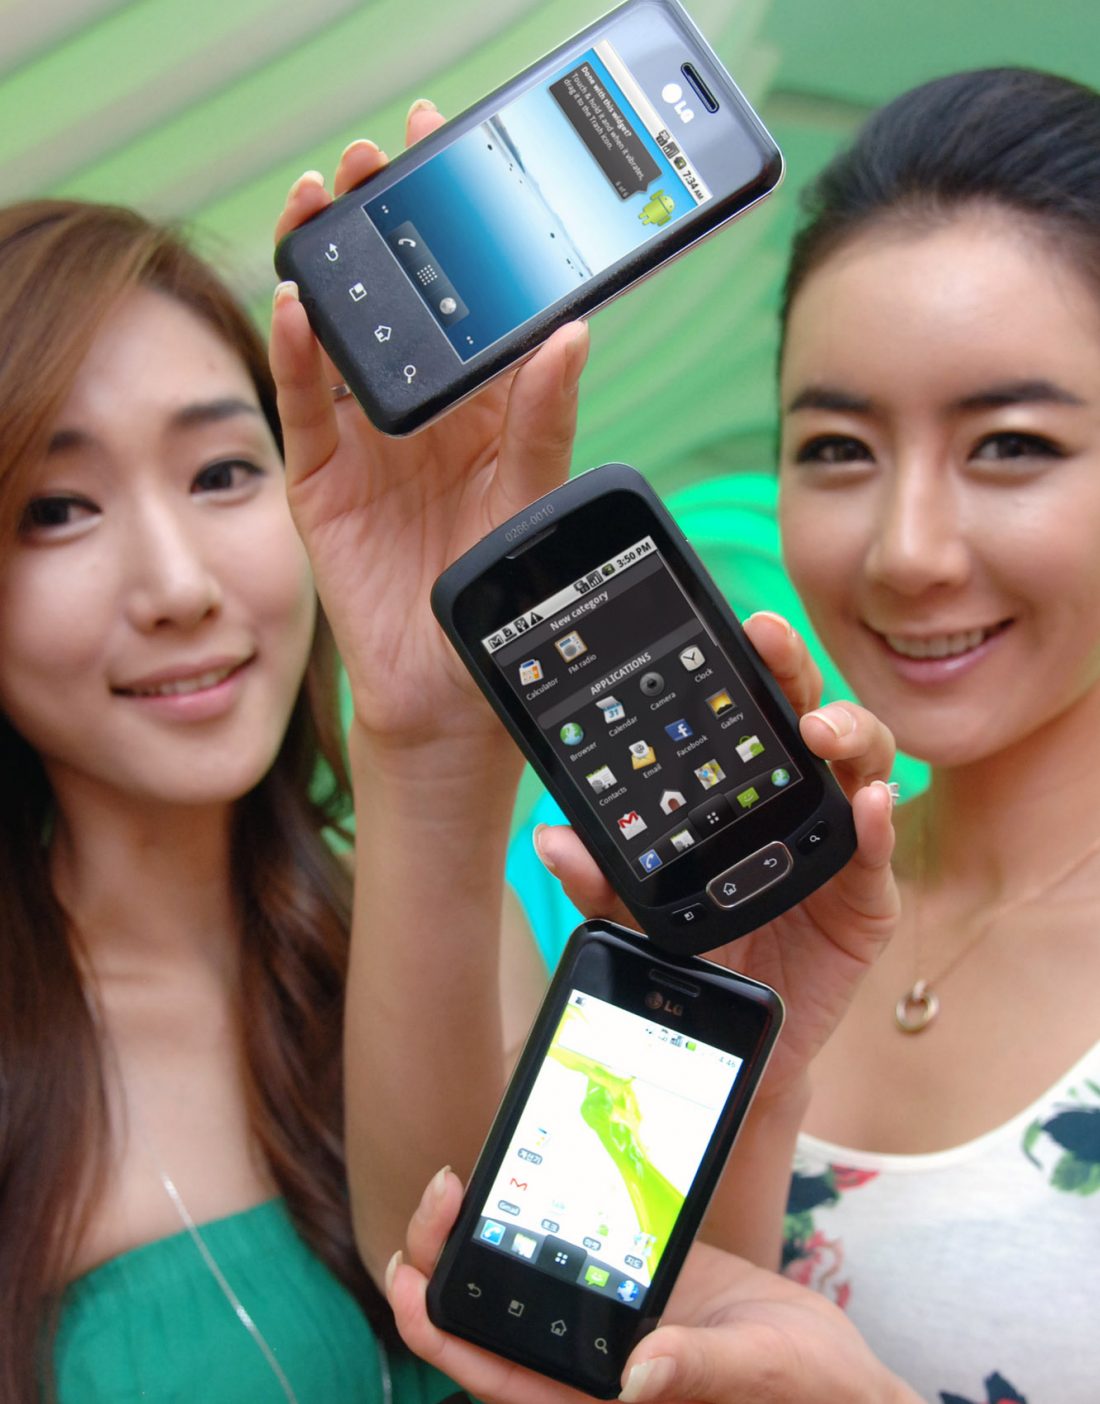 Two models hold up two variants of the LG Optimus Chic and one of the LG Optimus One in a vertical pattern.